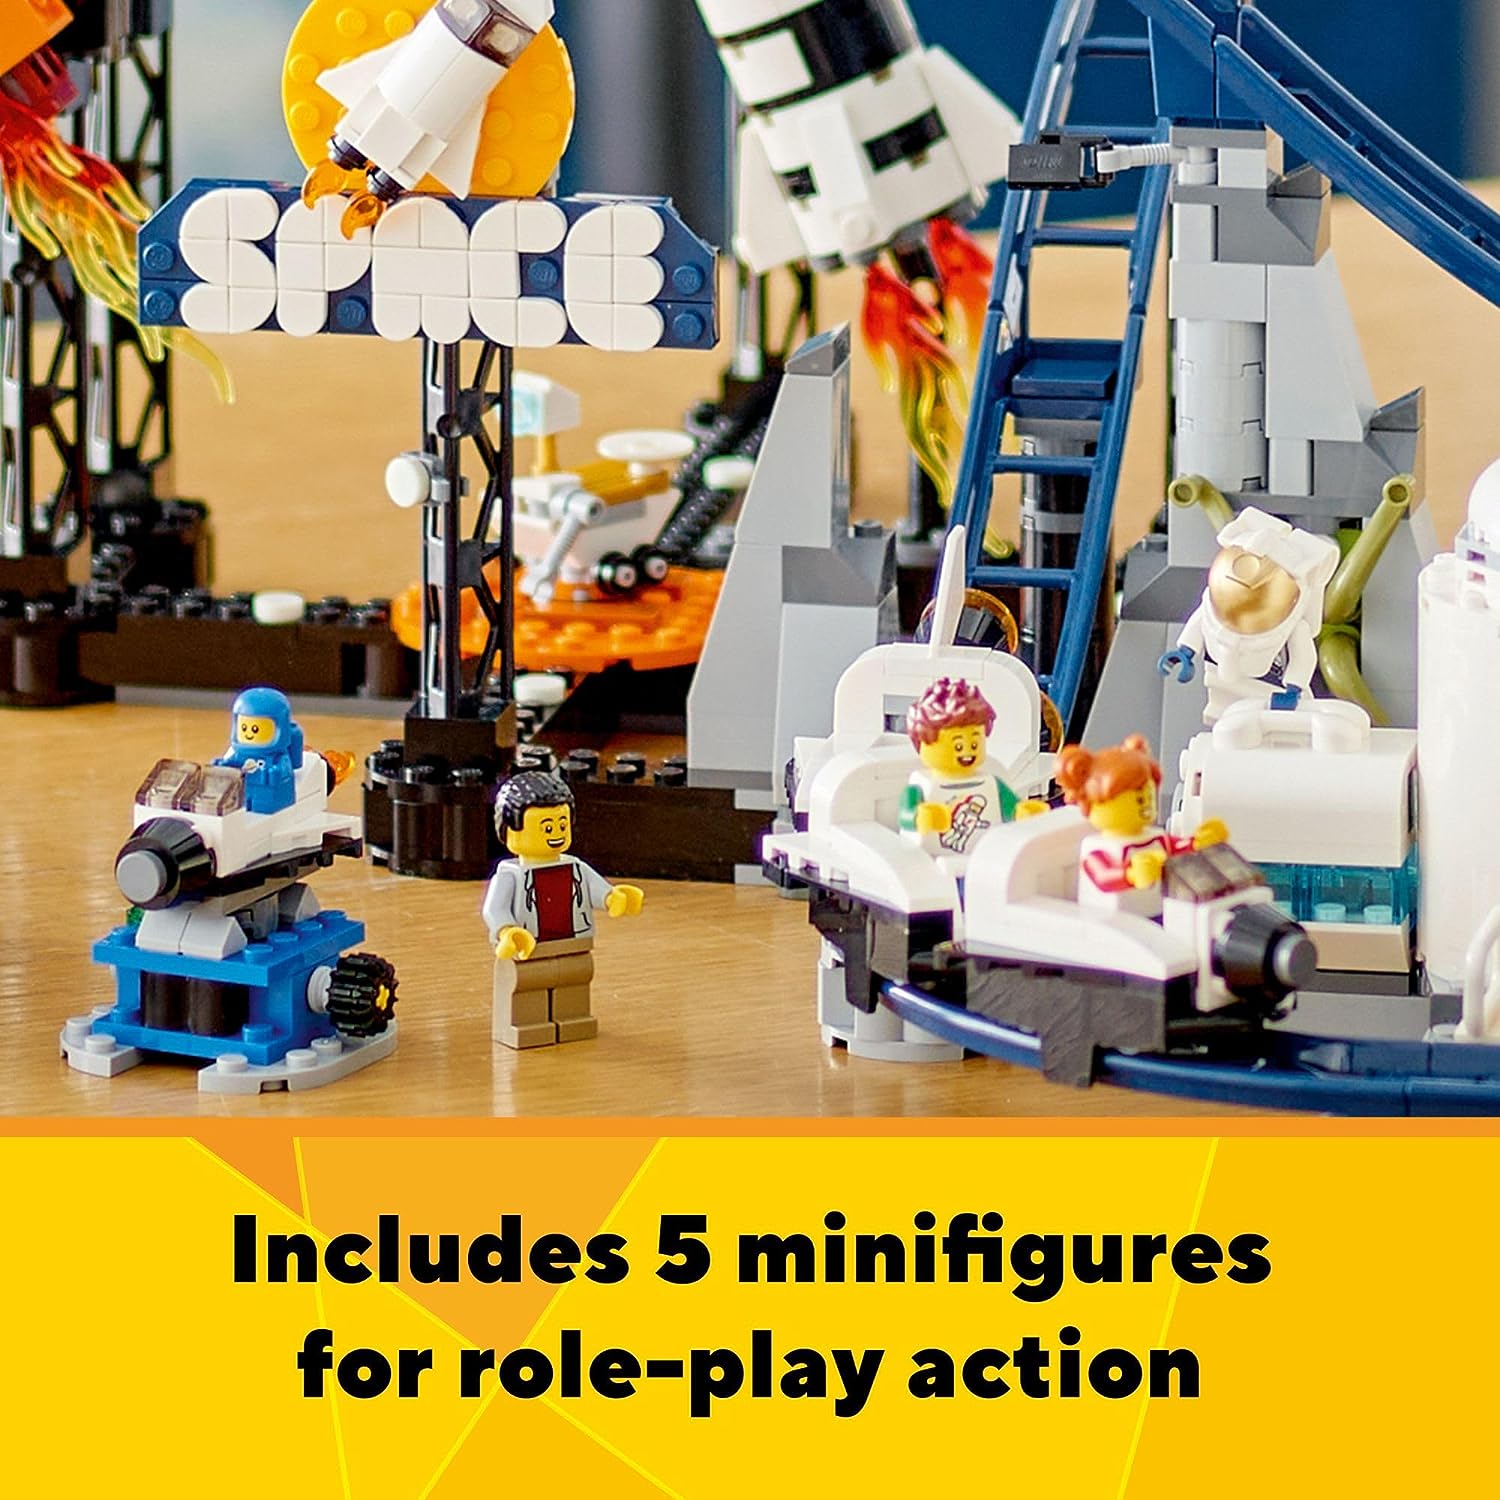 LEGO Creator Space Roller Coaster 31142 3 in 1 Building Toy Set Featuring a Roller Coaster, Drop Tower, Carousel and 5 Minifigures, Rebuildable Amusement Park